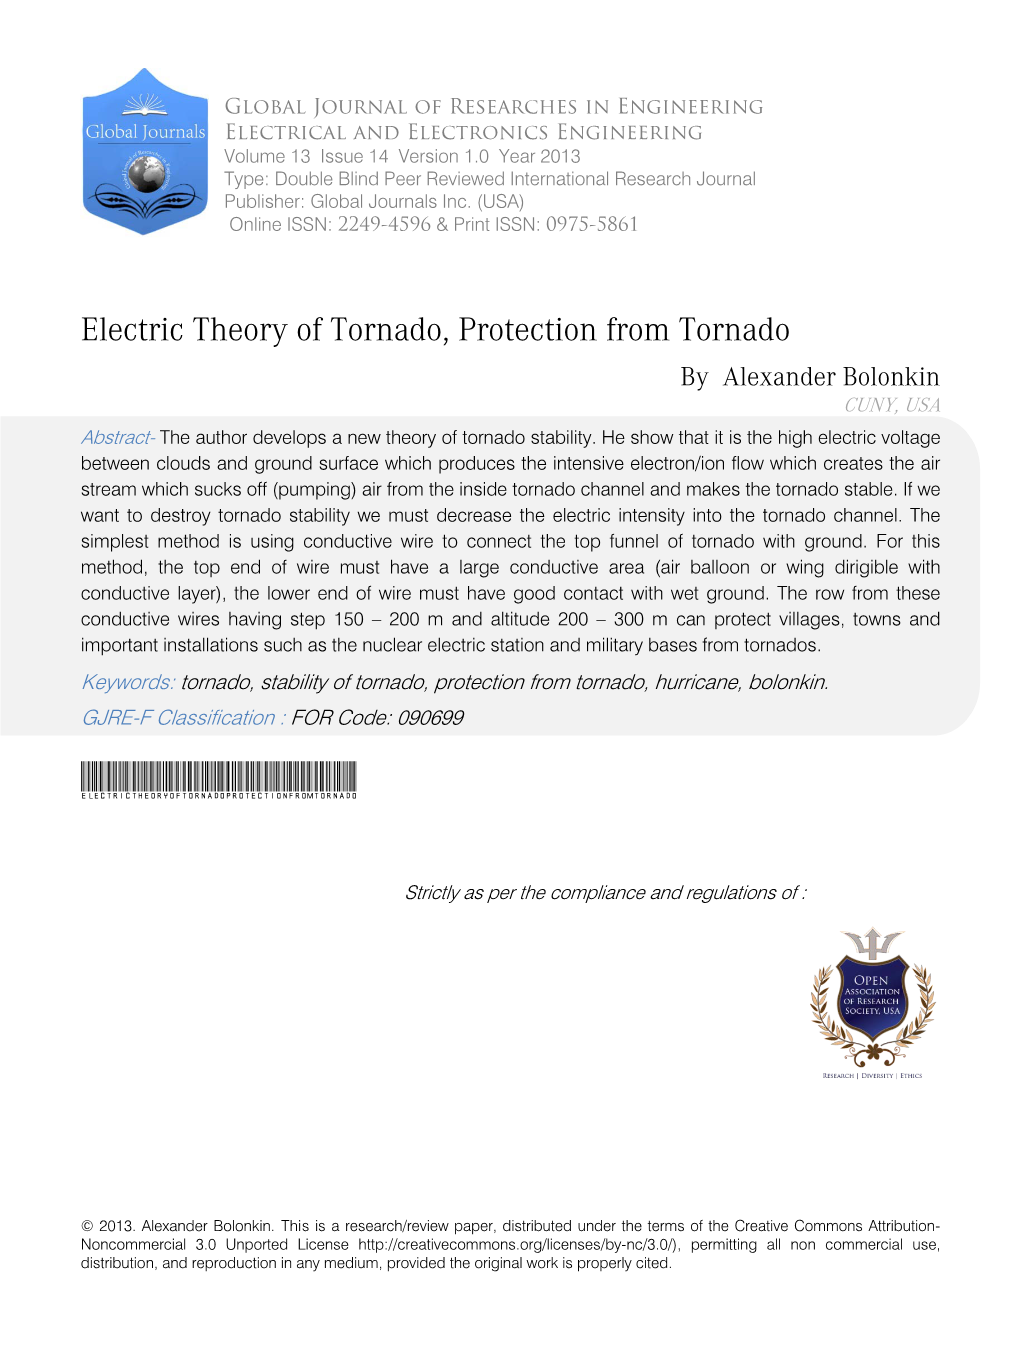 Electric Theory of Tornado, Protection from Tornado